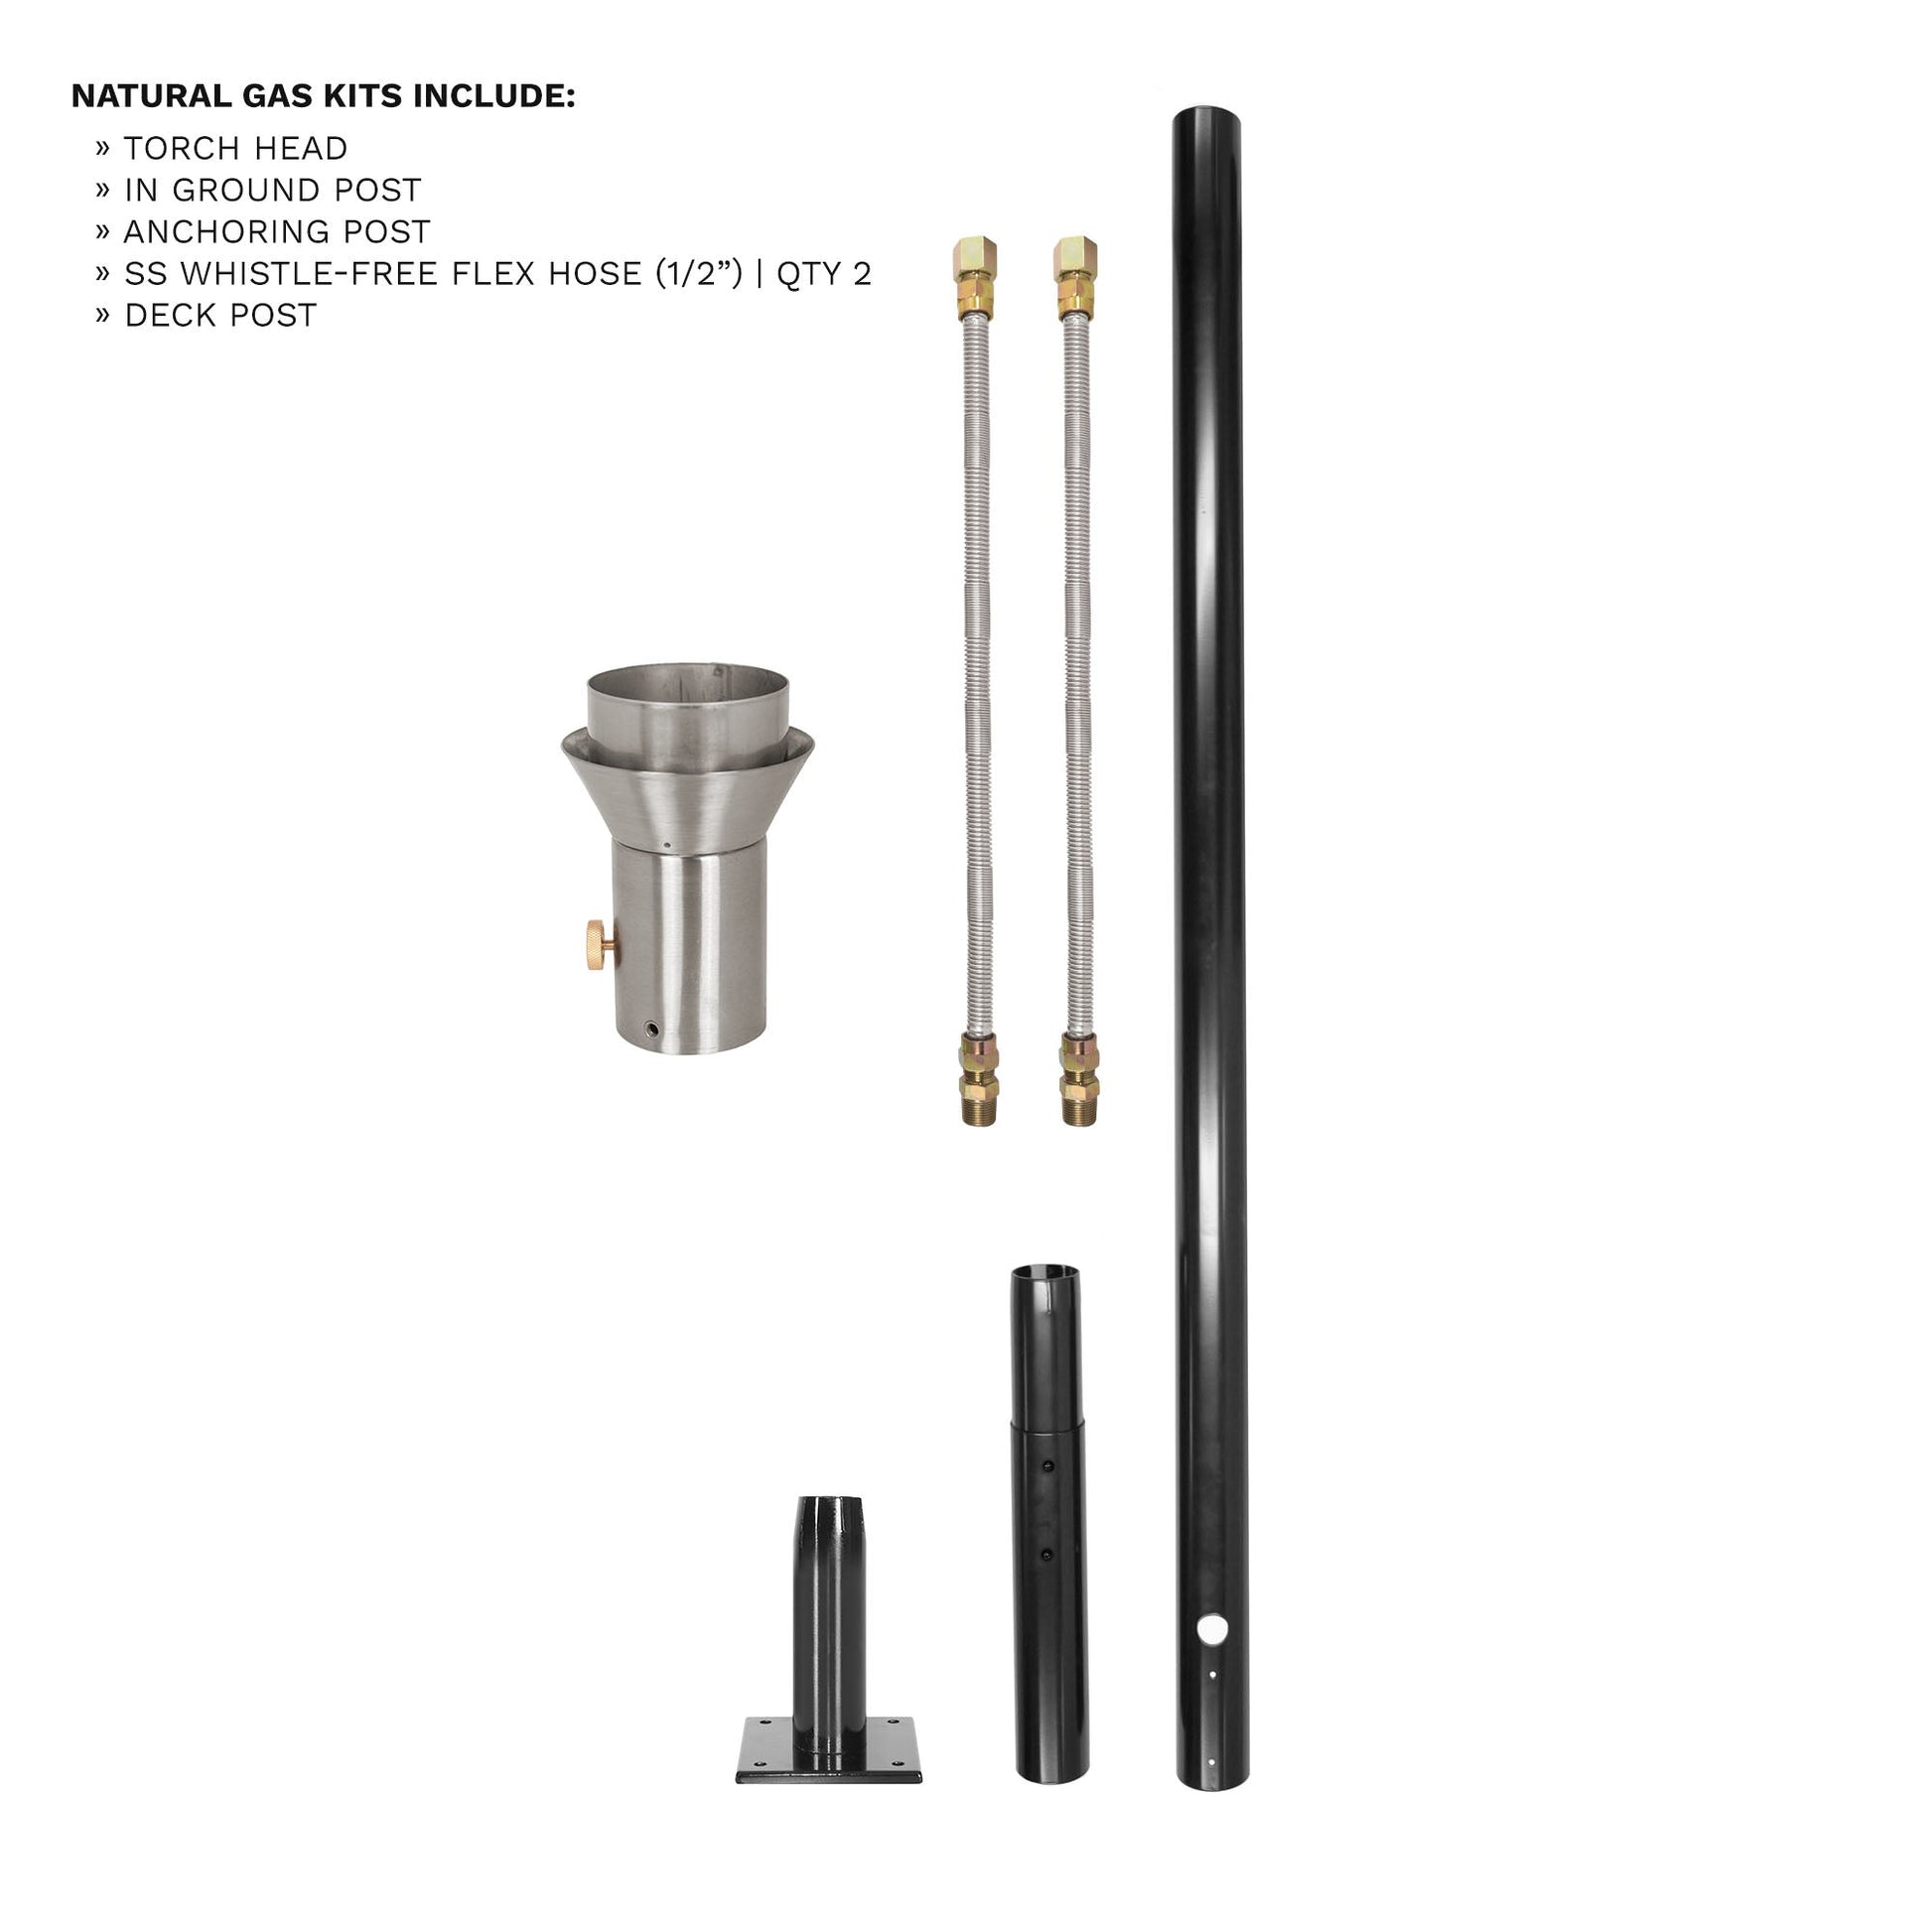 Vent Original TOP Torch & Post Complete Kit - Stainless Steel - Natural Gas-Novel Home